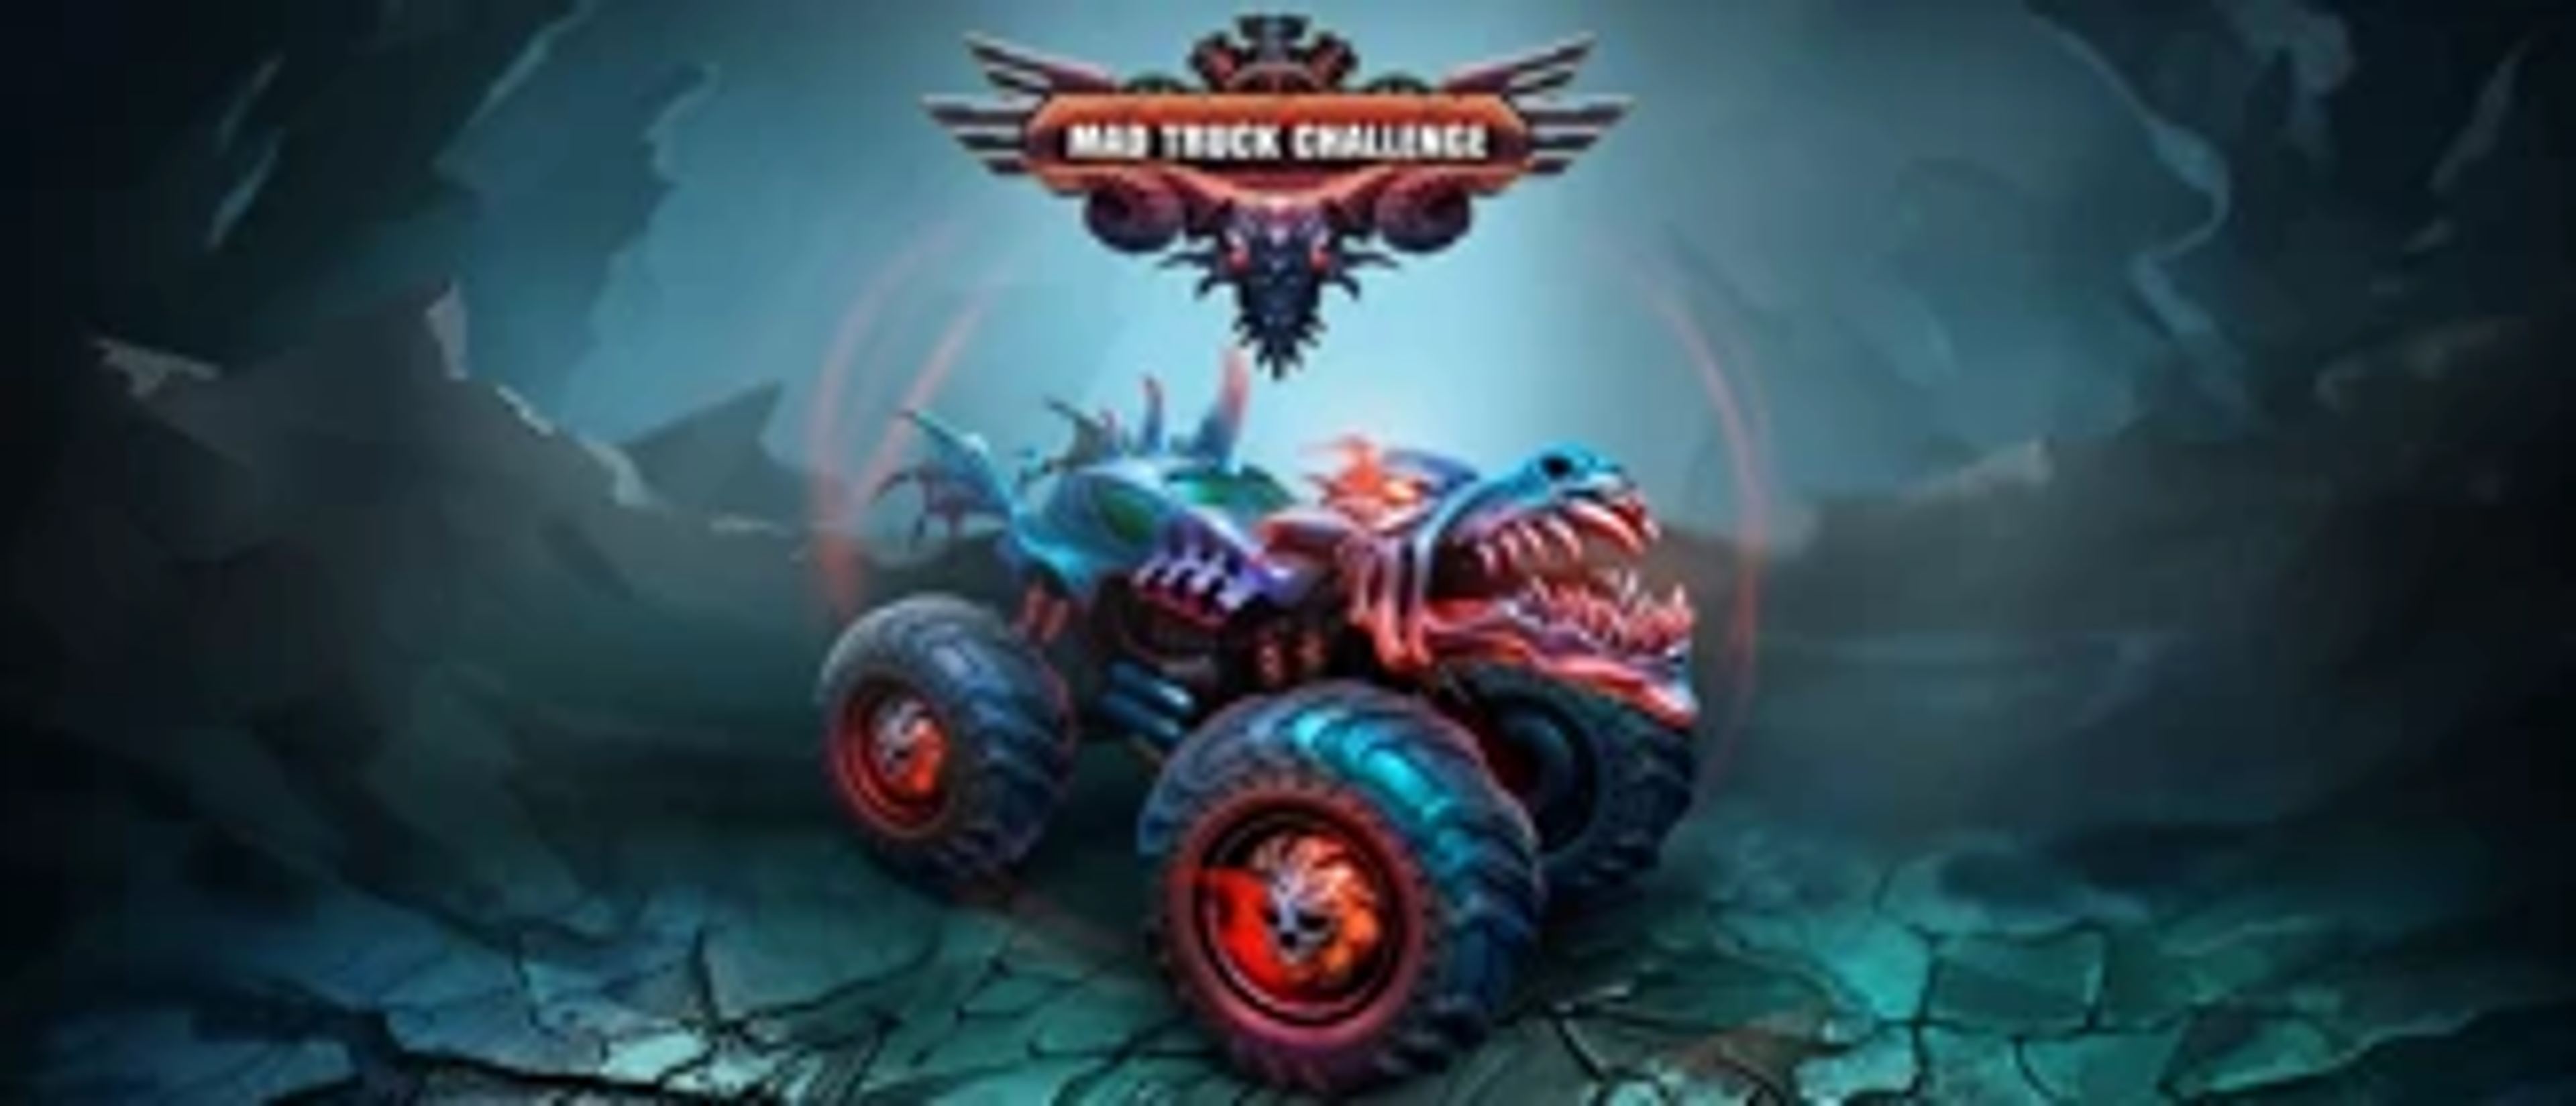 Mad Truck Challenge Special